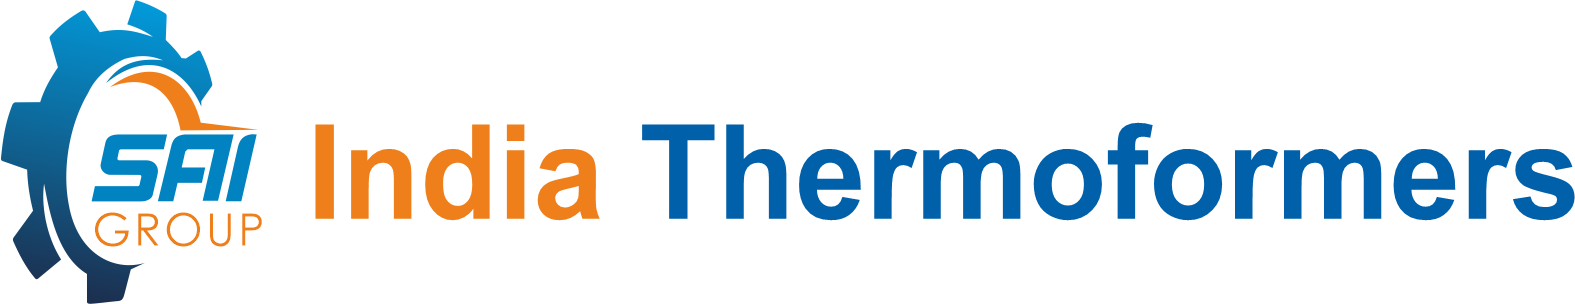 india thermoformers logo